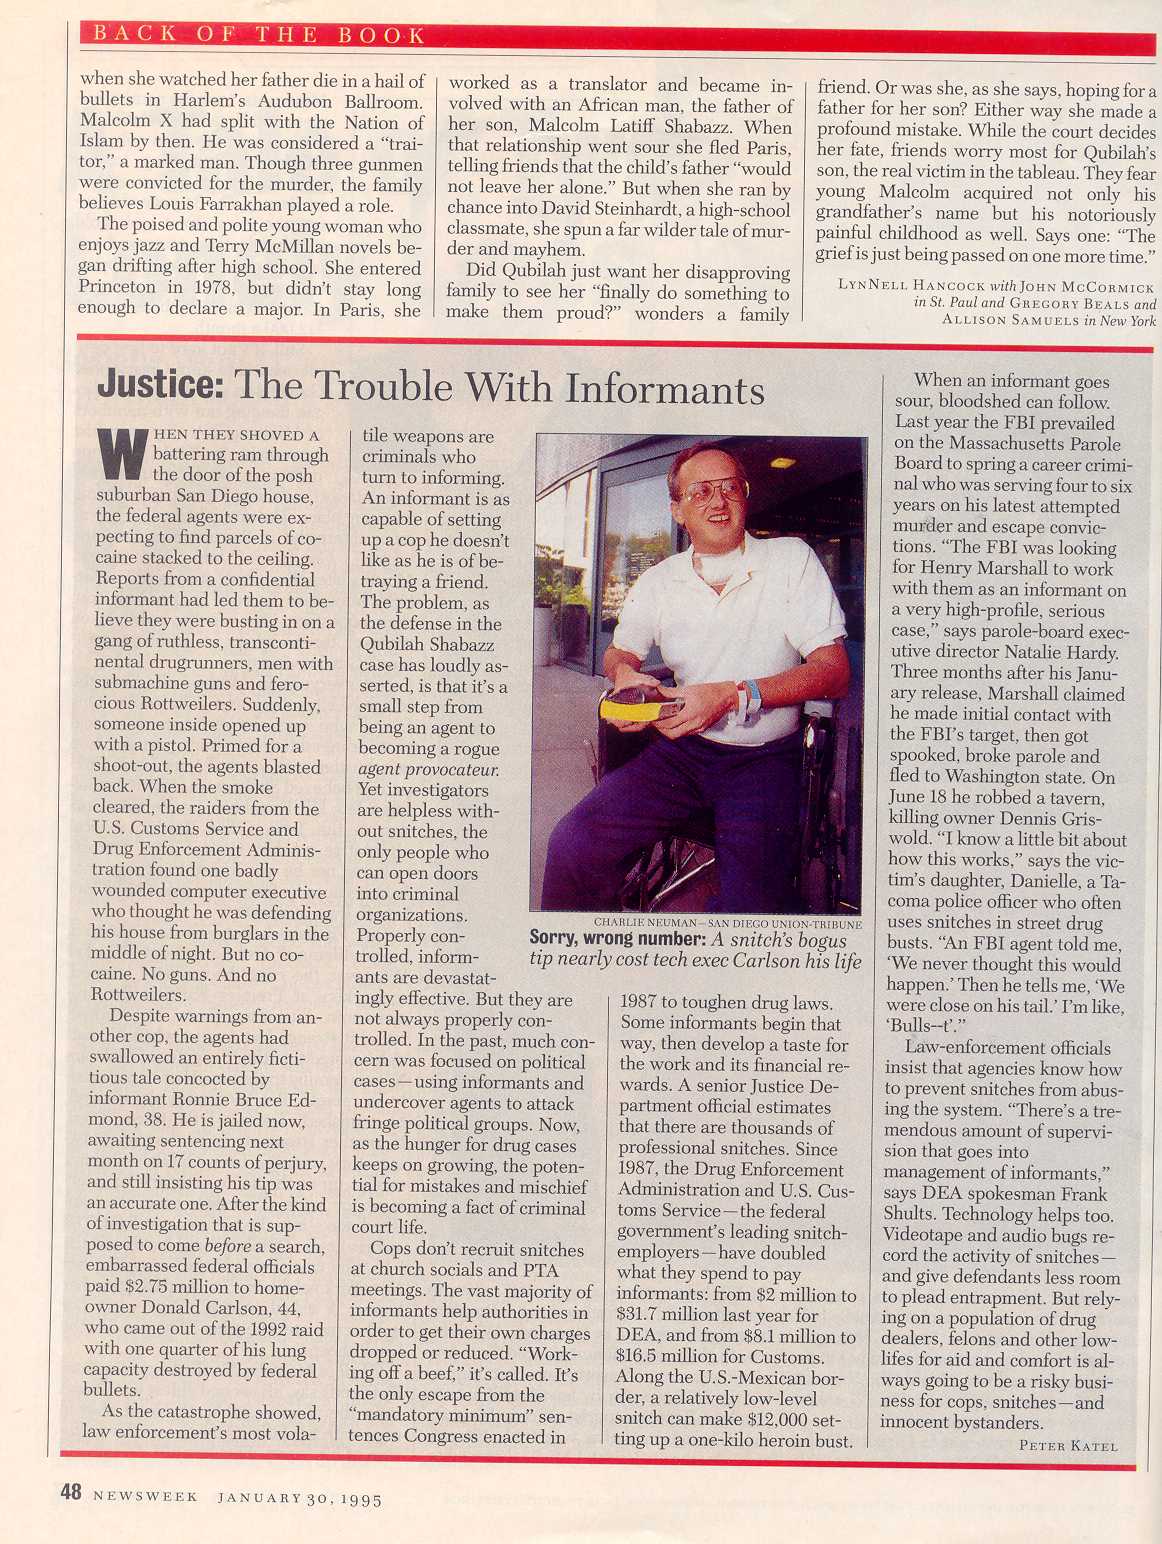 Peter Katel – The Trouble With Informants – NEWSWEEK Magazine (1995)